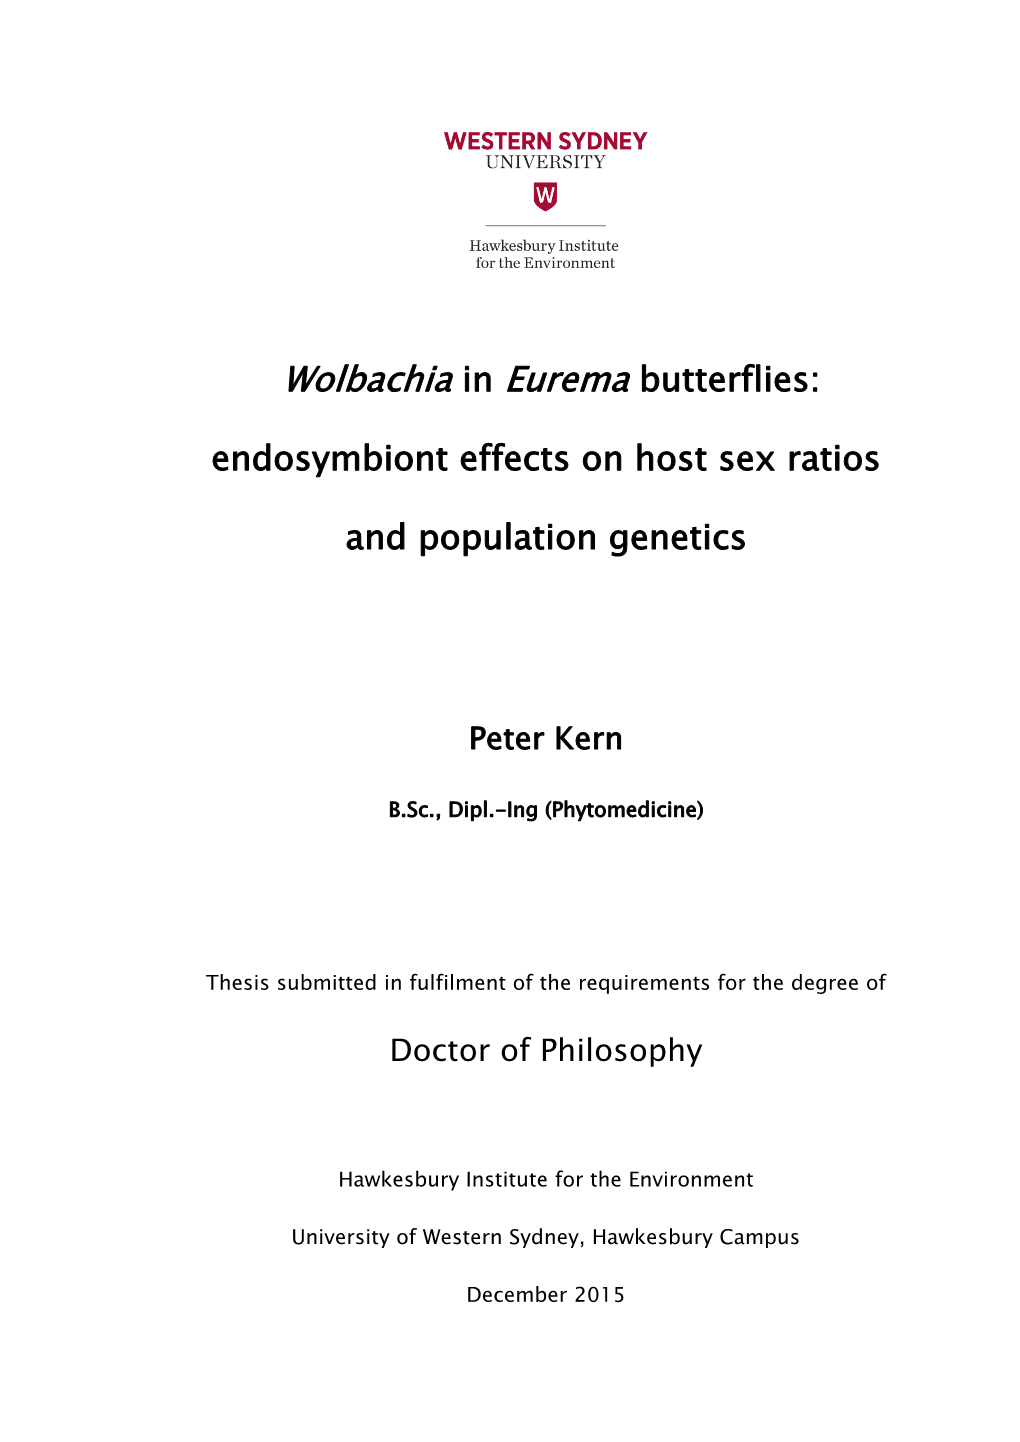 Wolbachia in Eurema Butterflies: Endosymbiont Effects on Host Sex